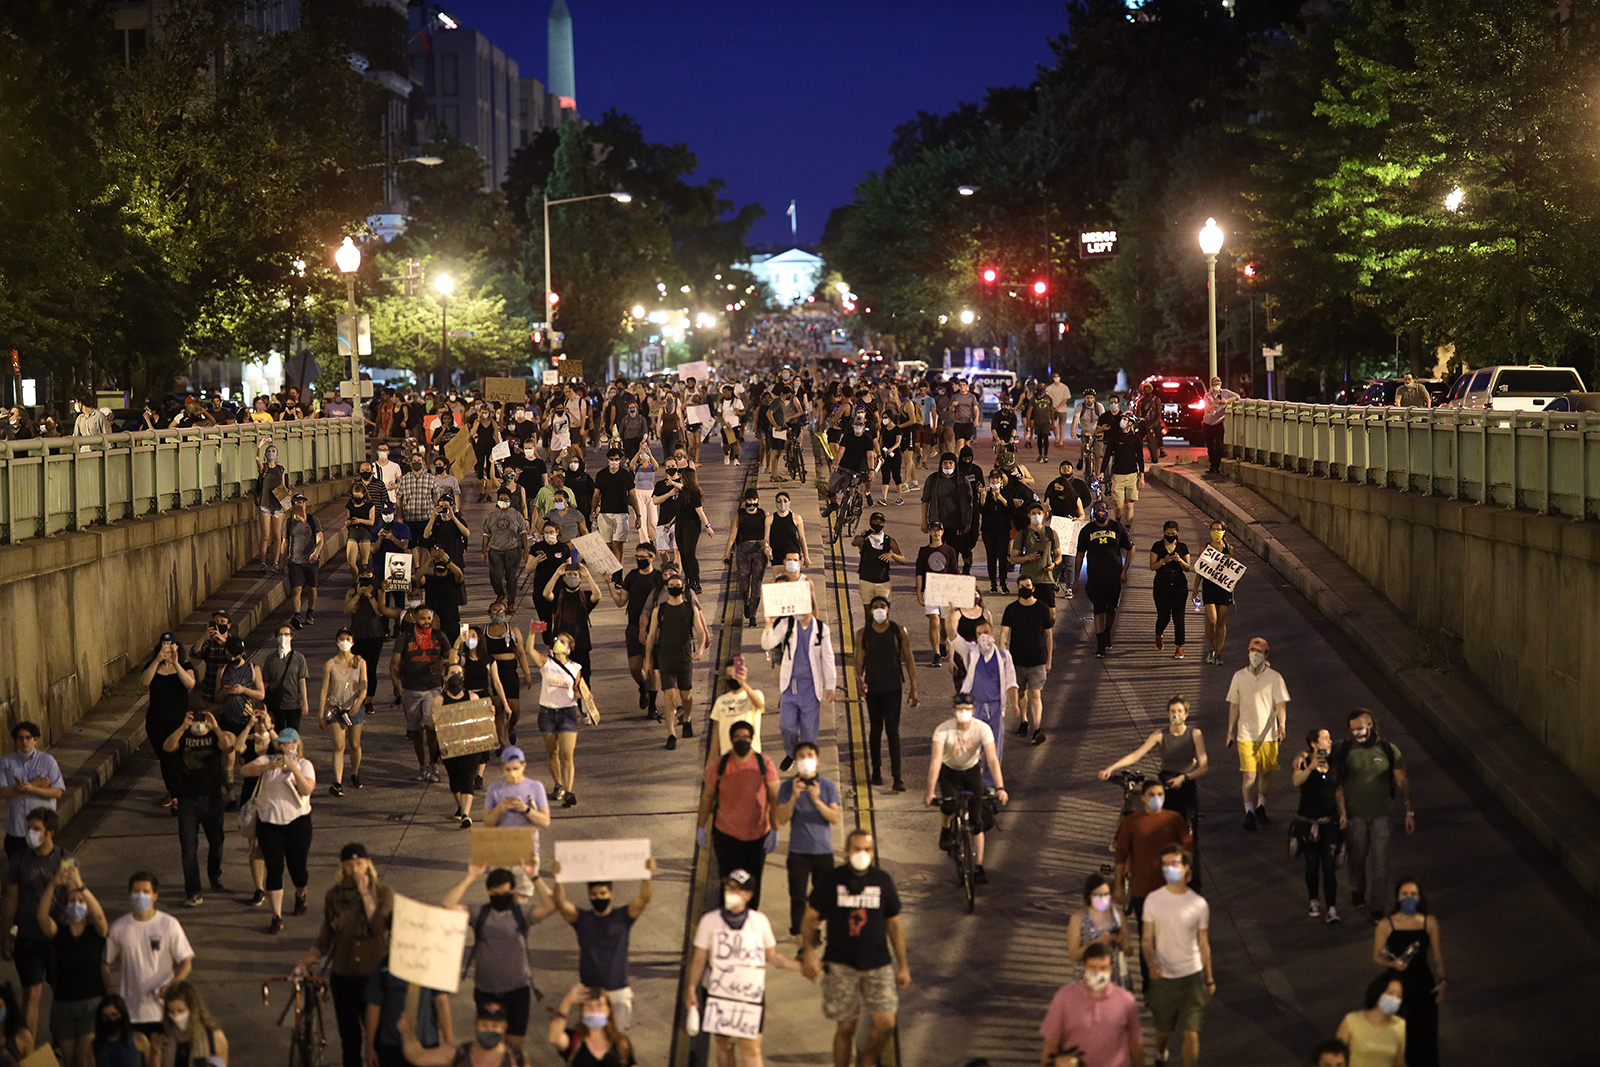 Demonstrators march away from the White House during a peaceful protest against police brutality and the death of George Floyd, on June 3, in Washington, DC.